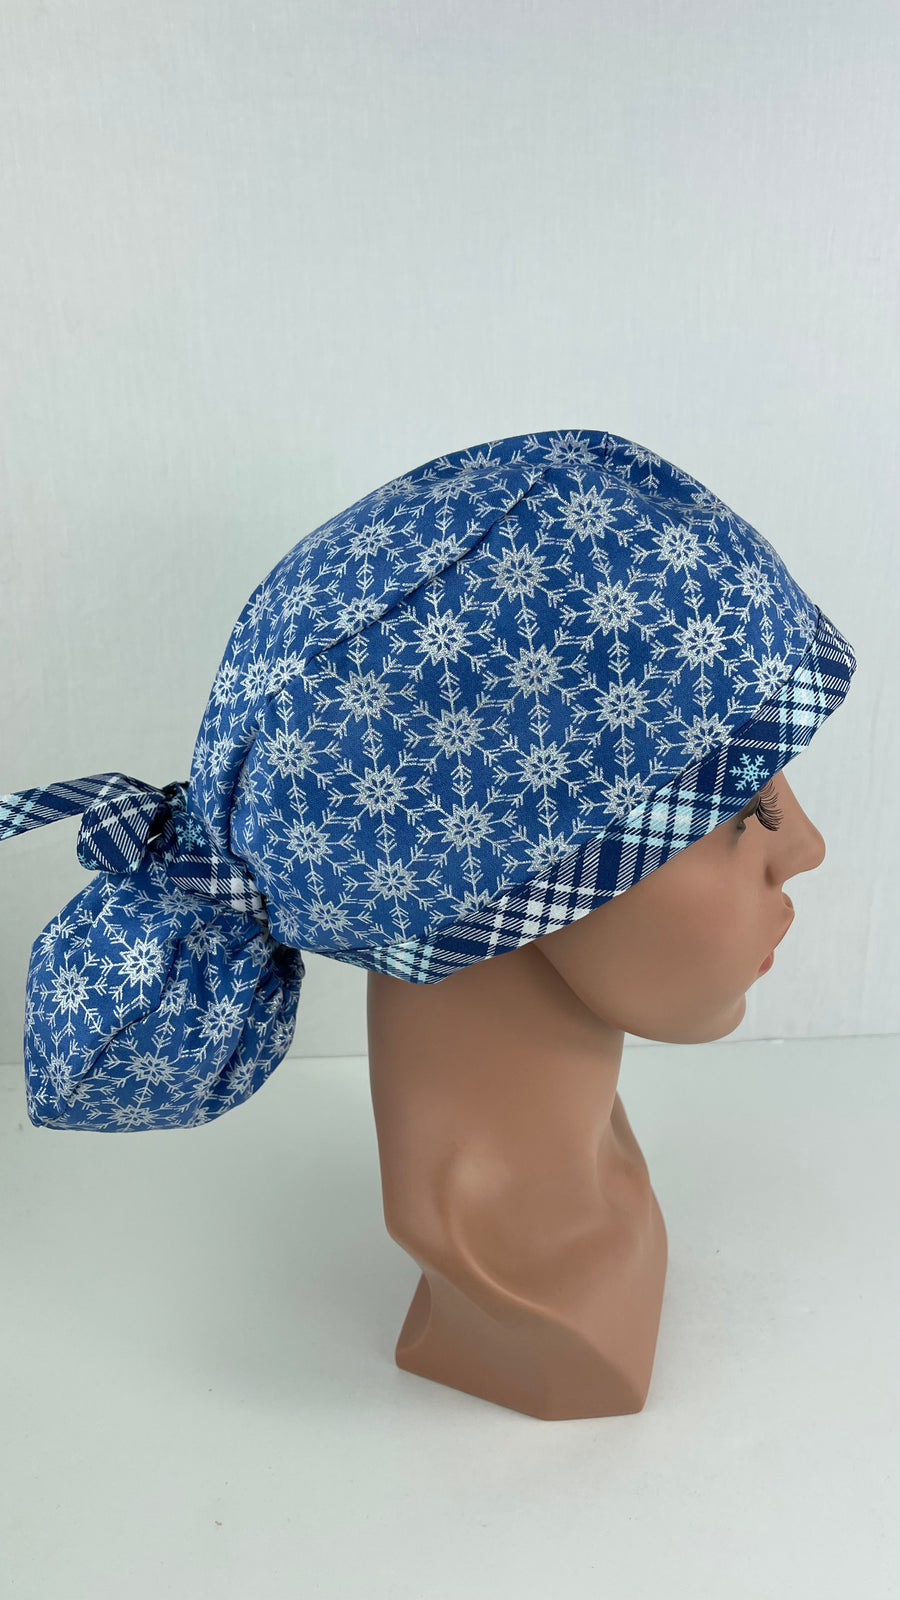 Silver Snowflakes Ponytail Hat